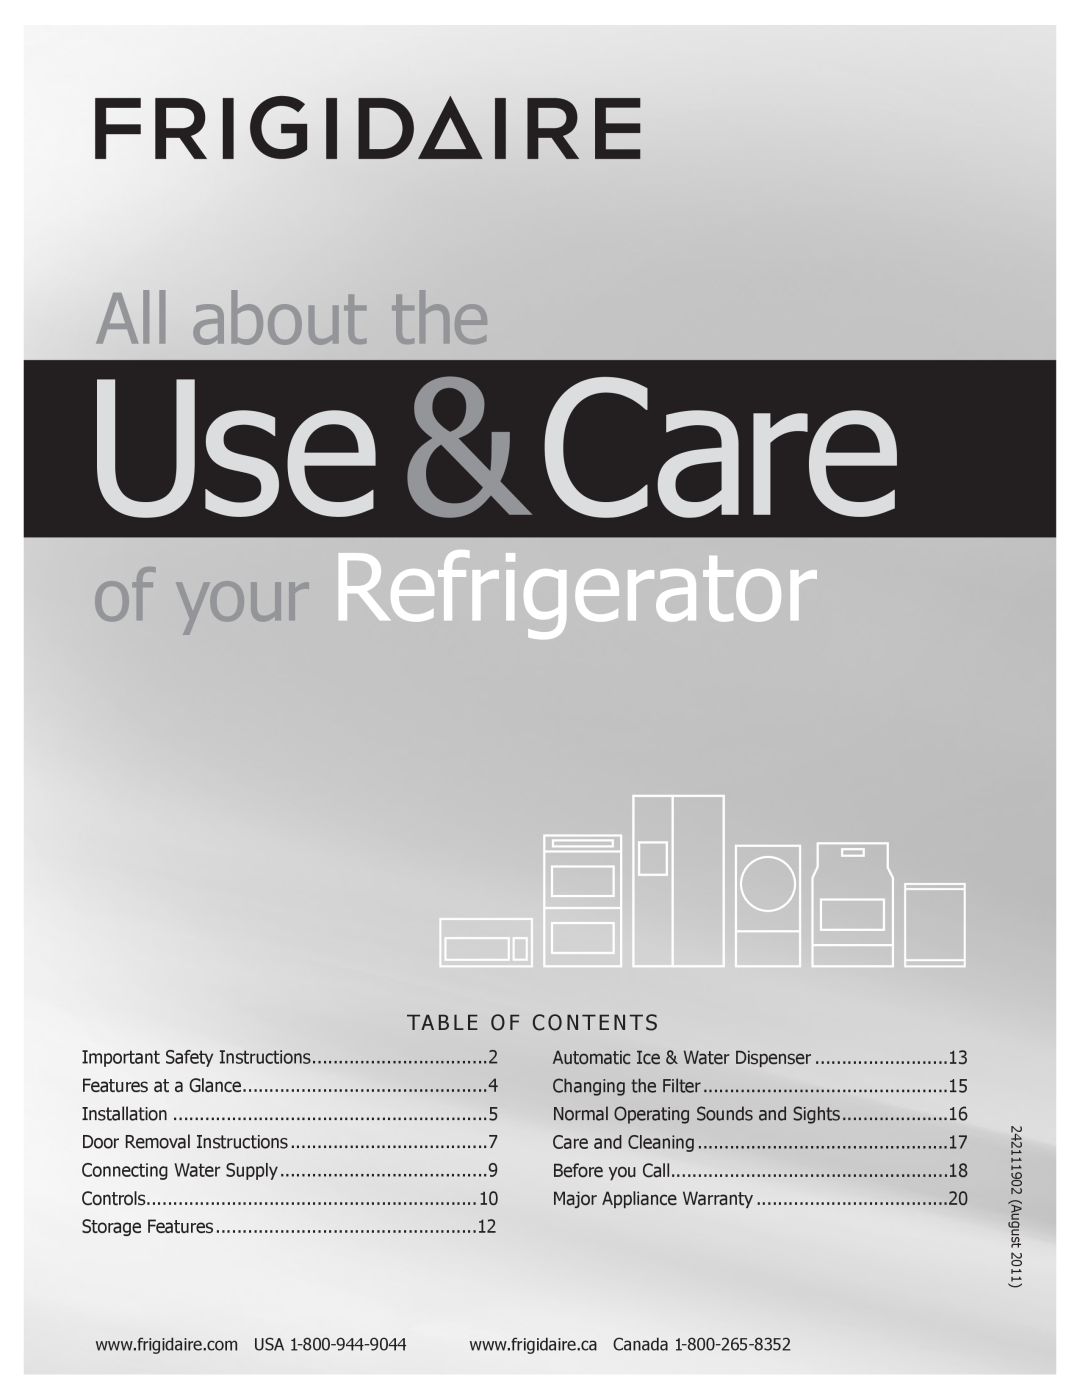 Frigidaire FGHS2332LE important safety instructions Use &Care, of your Refrigerator, All about the, August, Installation 